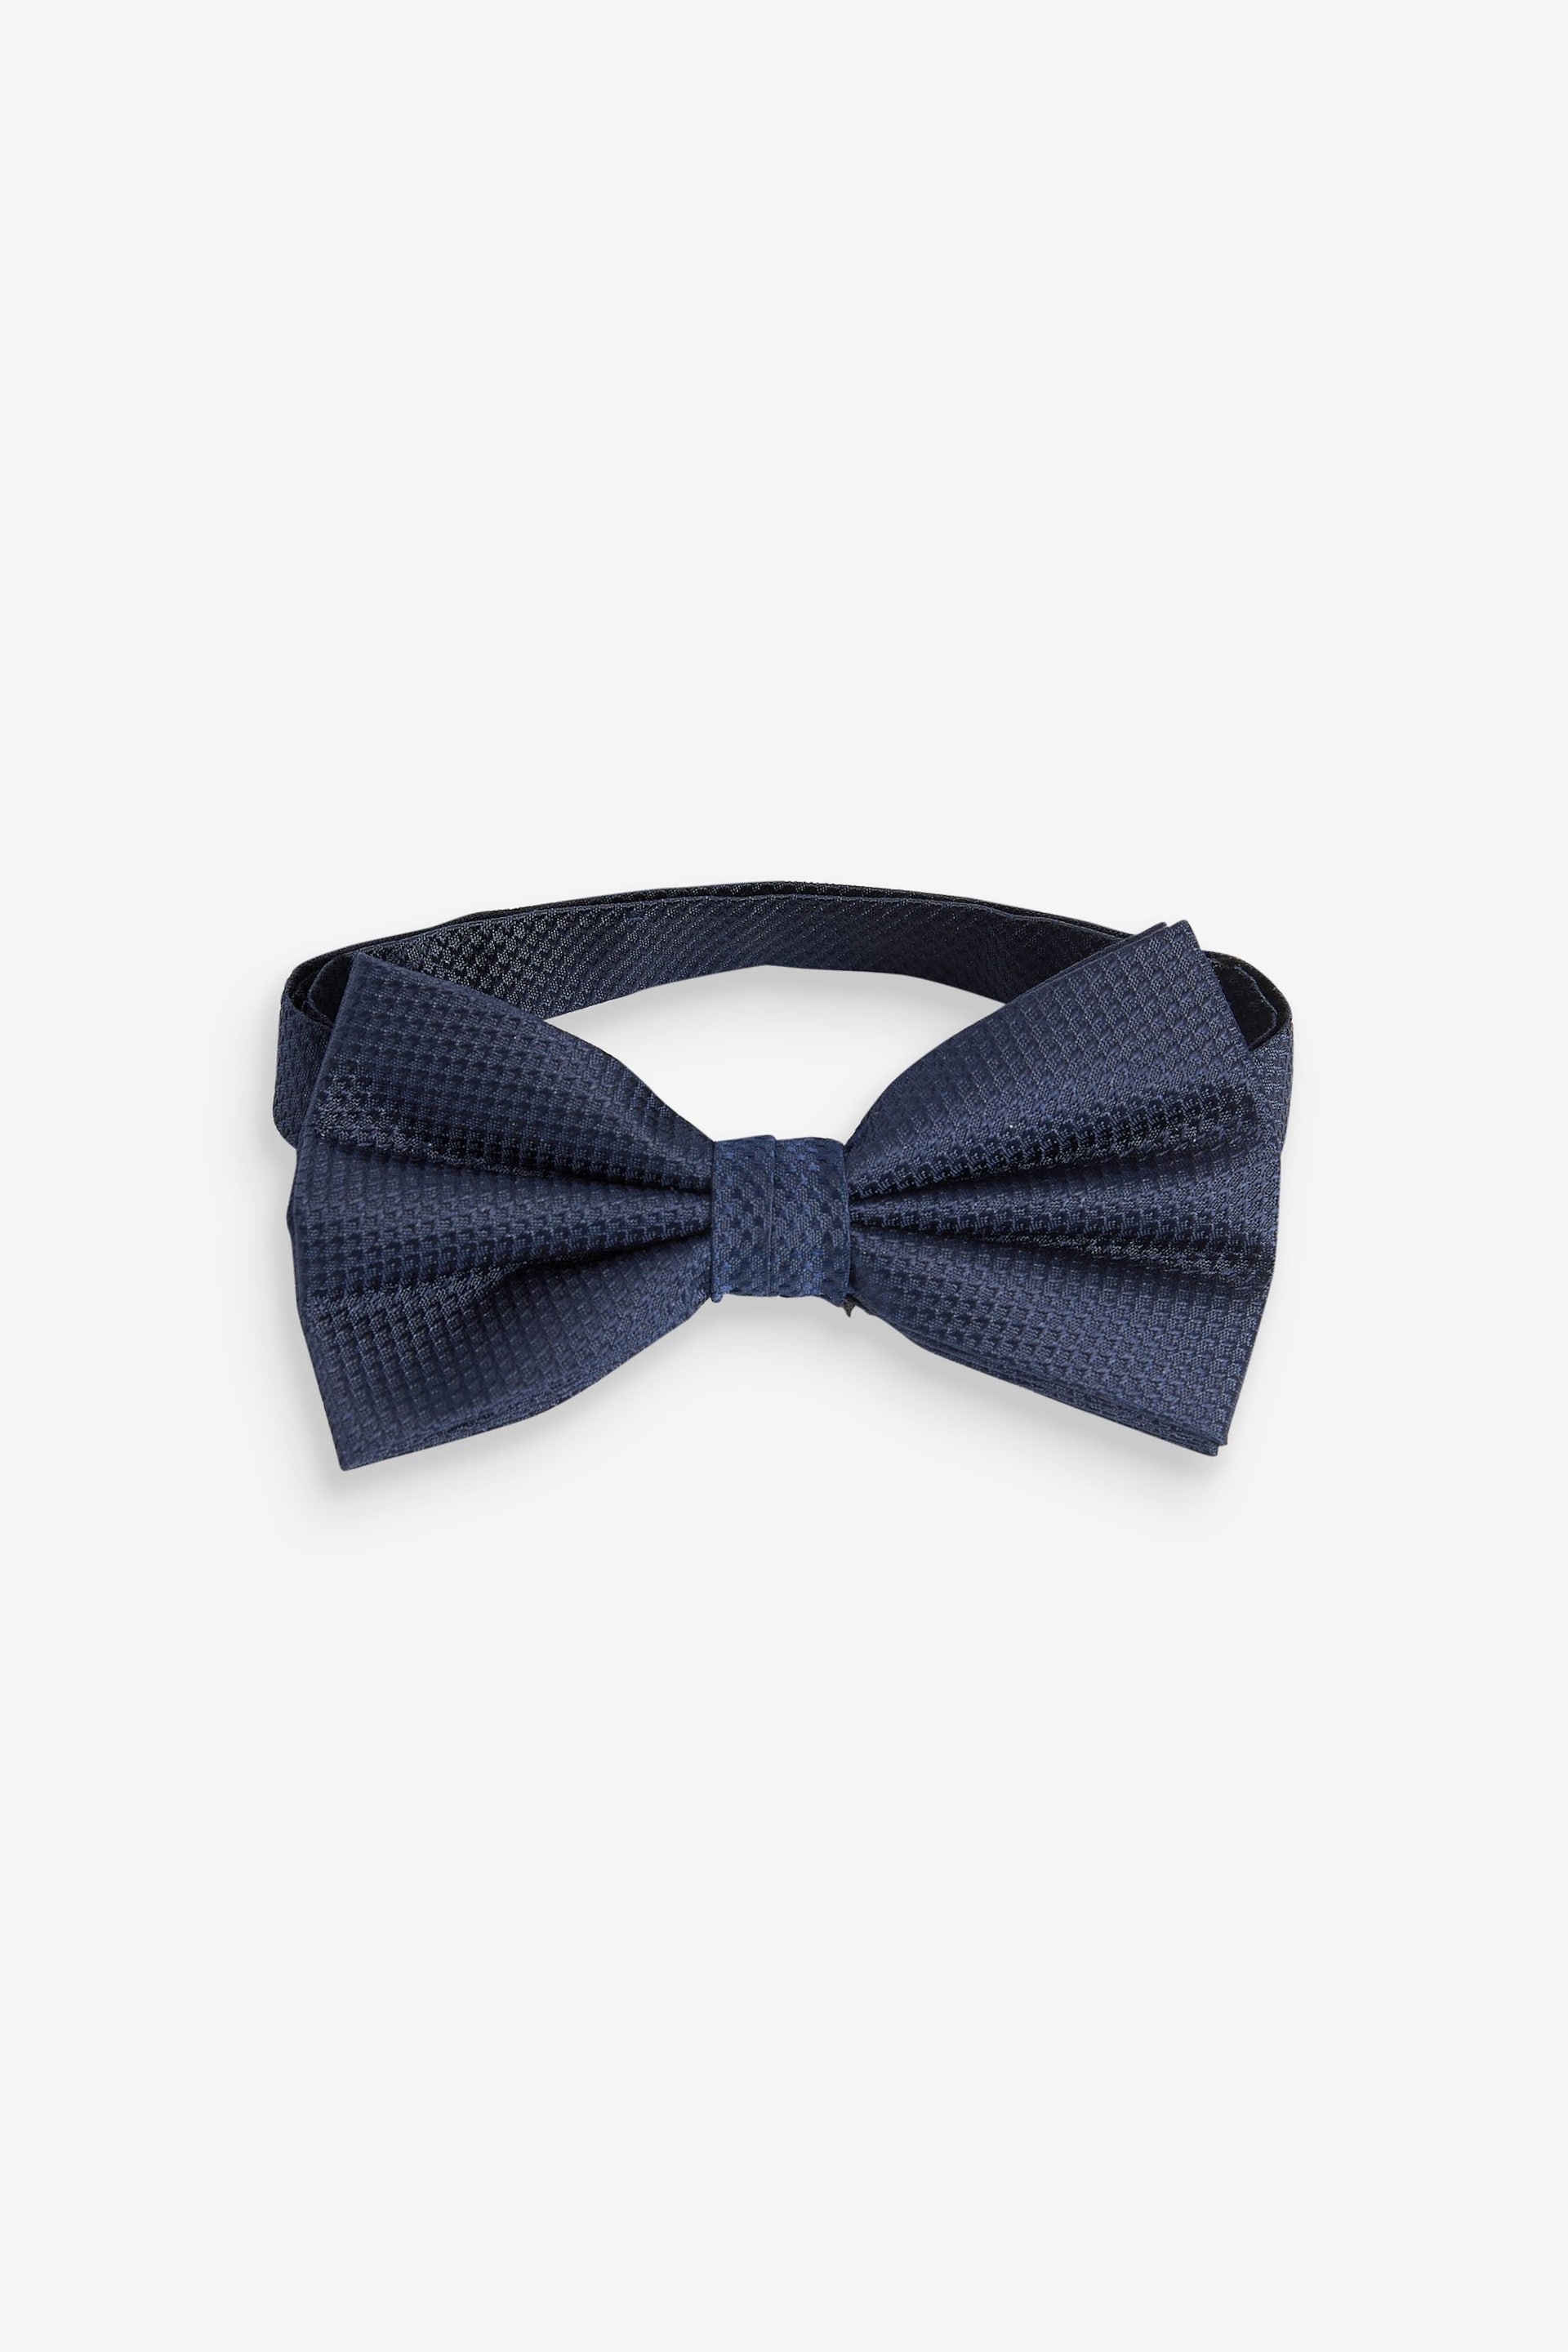 Navy Blue Textured Silk Bow Tie - Image 2 of 4